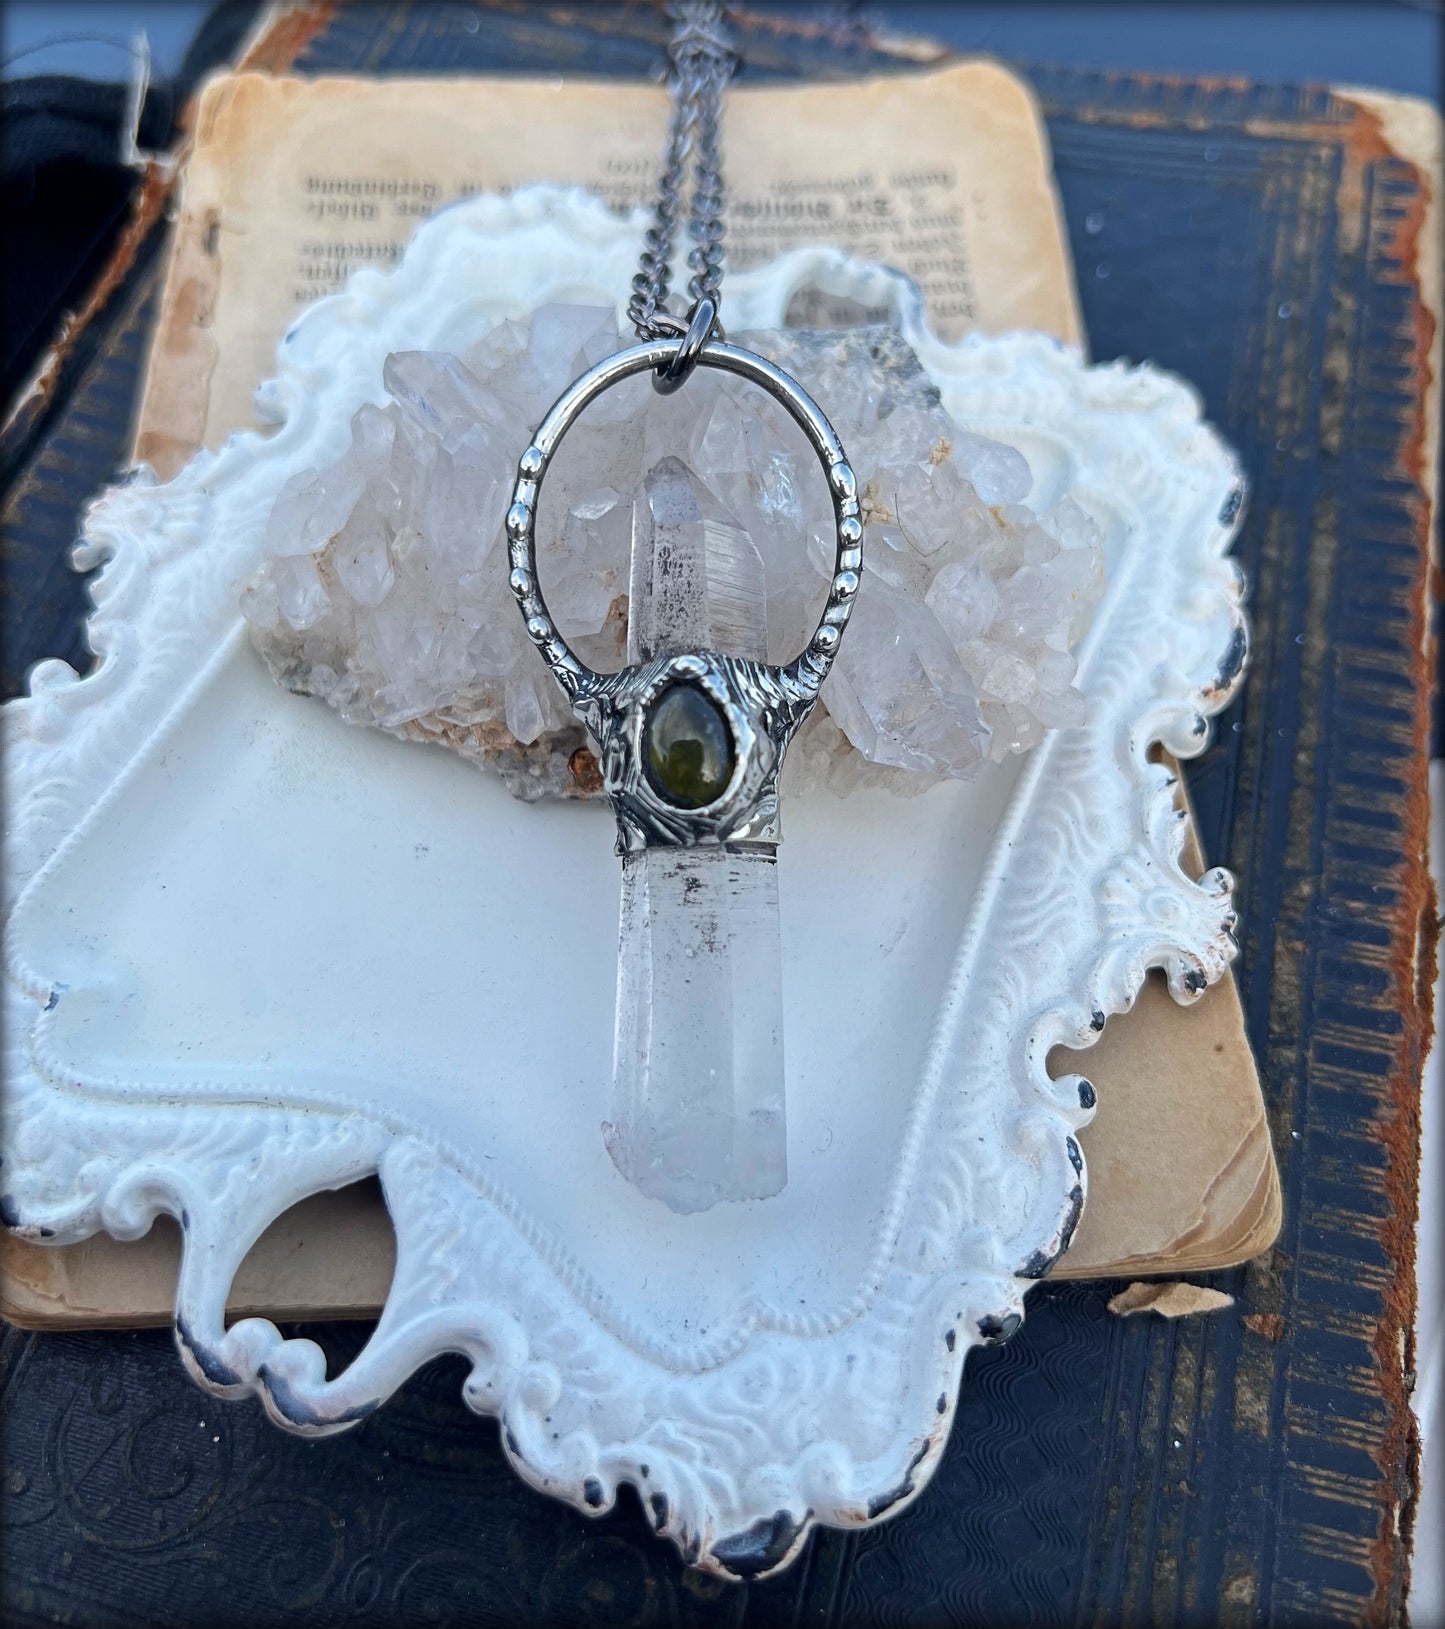 Anahata~Hand crafted Arkansas clear quartz and Olive vesuvianites Tiffany technique crystal Talisman necklace~